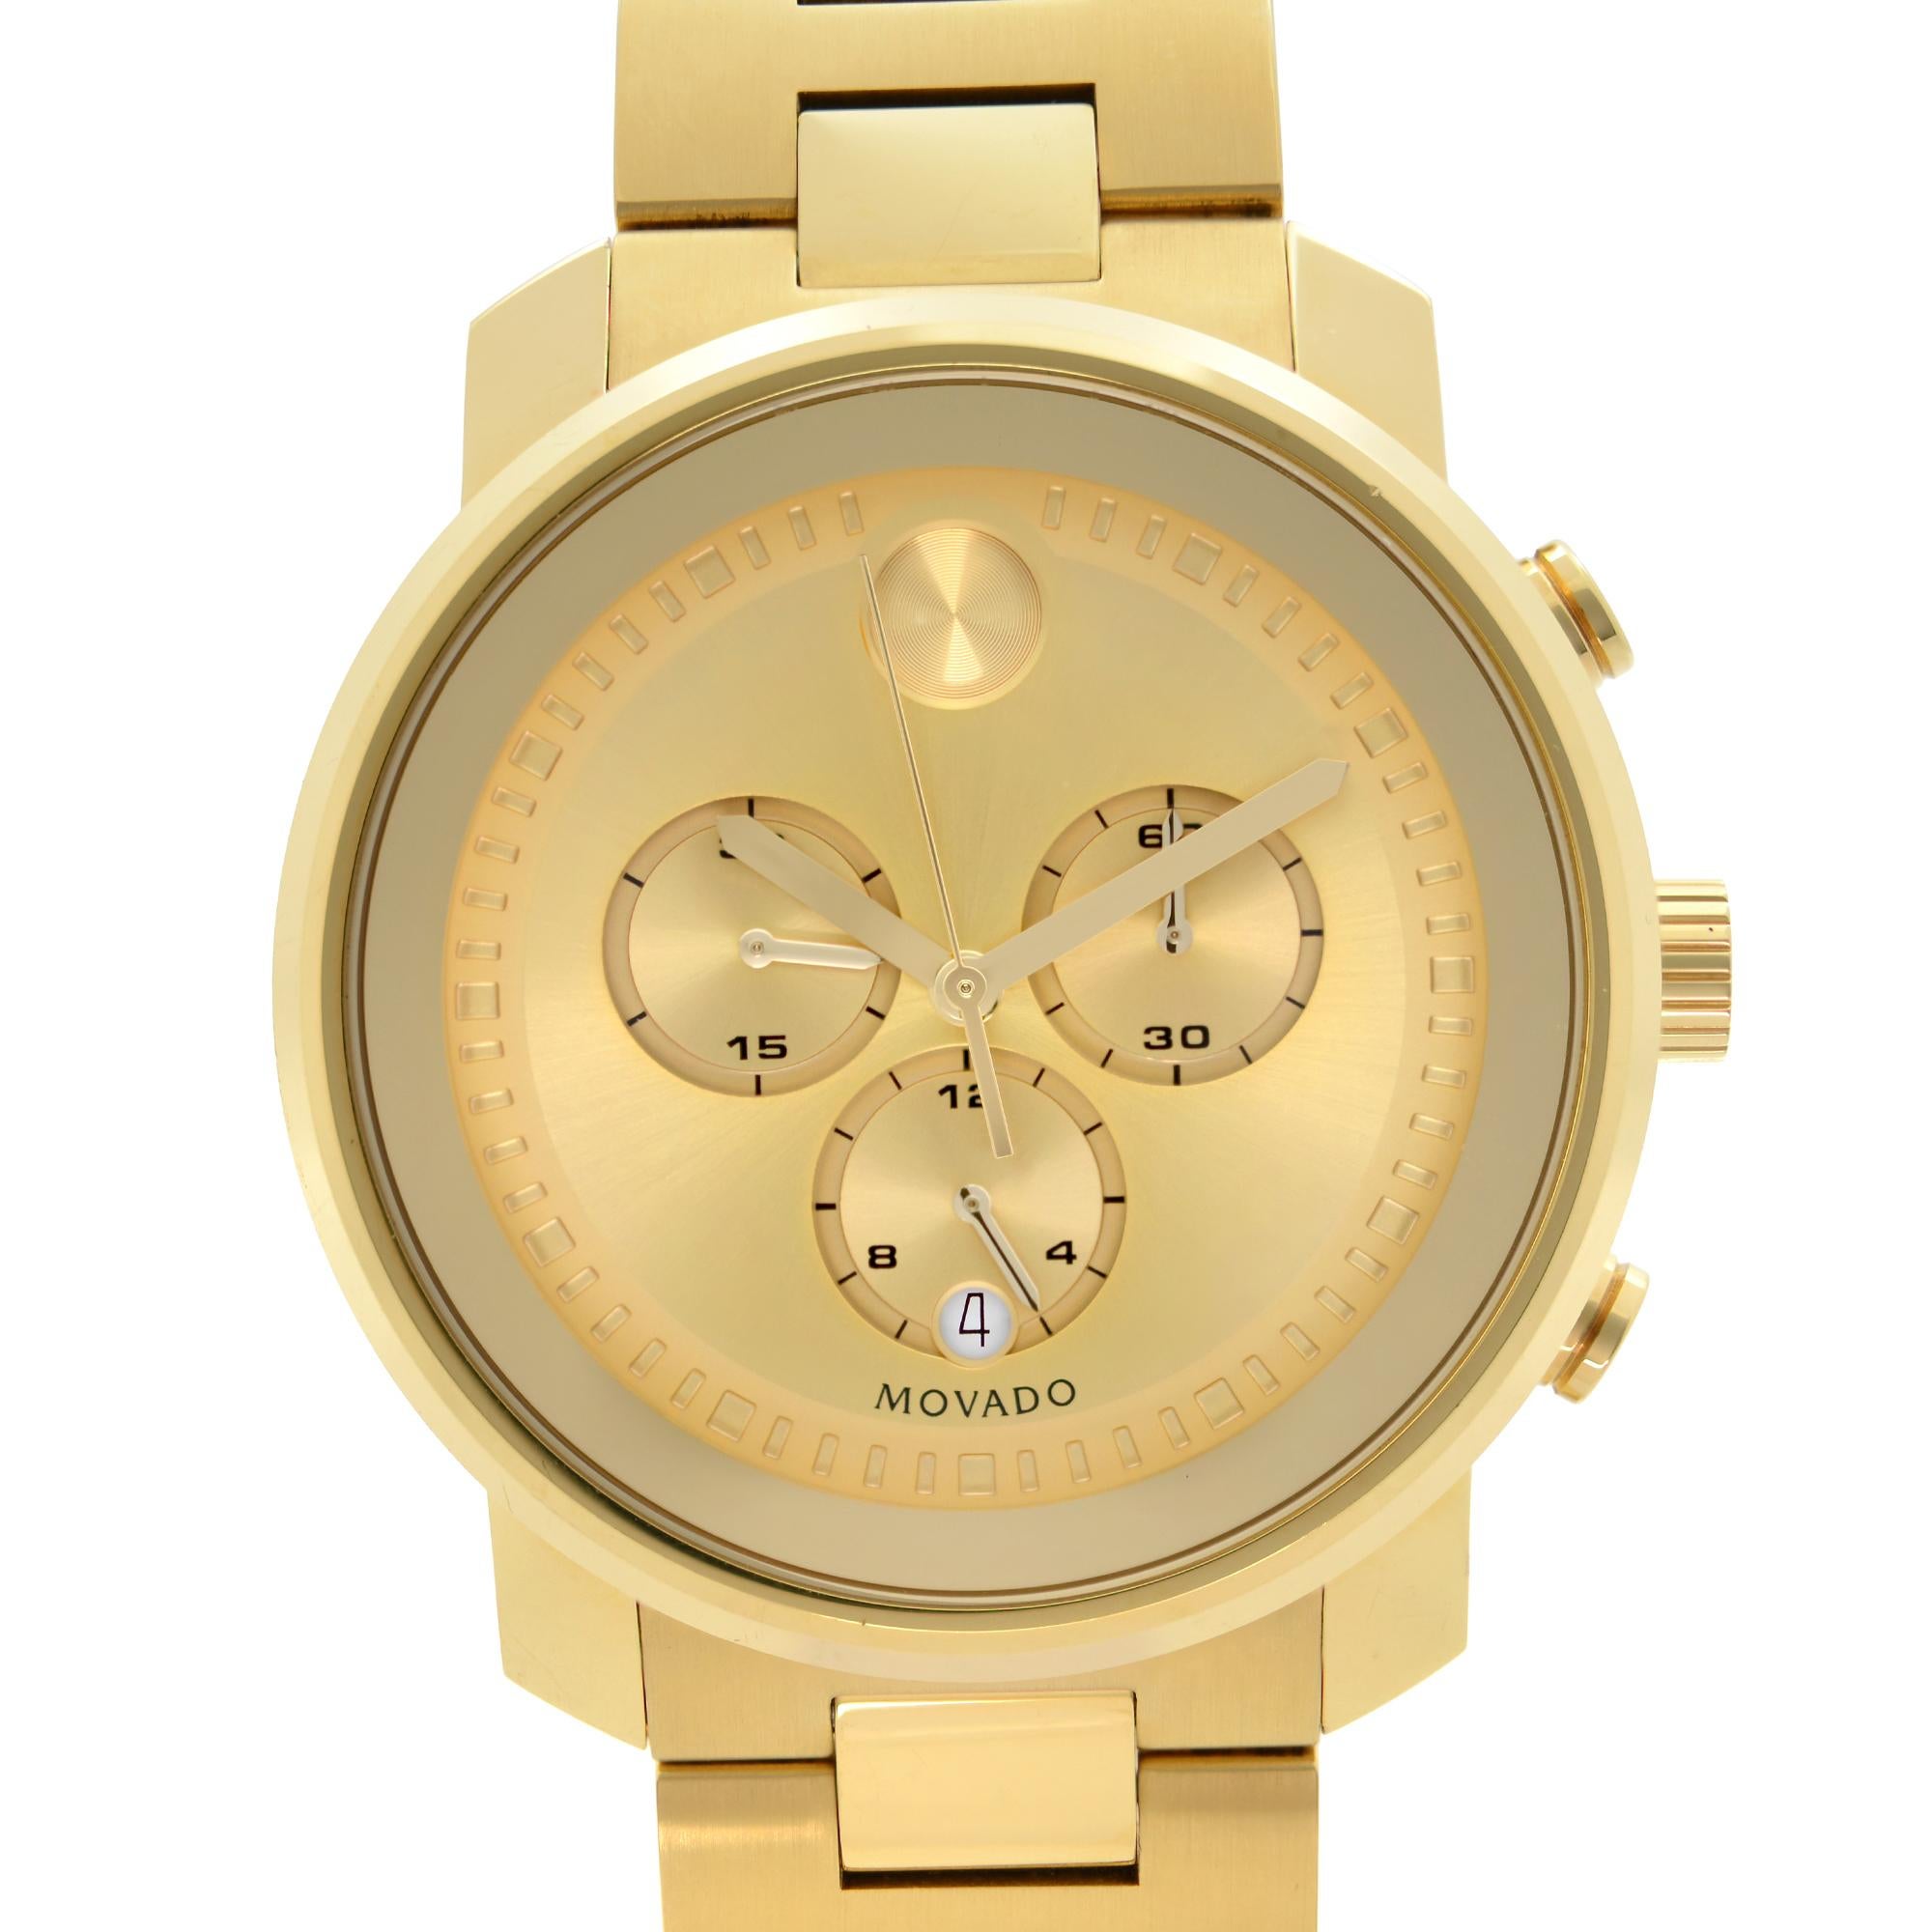 Pre Owned MOVADO Bold Champagne Dial Yellow Gold Ion-plated Men's Watch 3600278.  Yellow gold ion-plated stainless steel case and bracelet. Fixed yellow gold ion-plated bezel. Champagne dial with yellow gold-tone hands. Minute markers around the